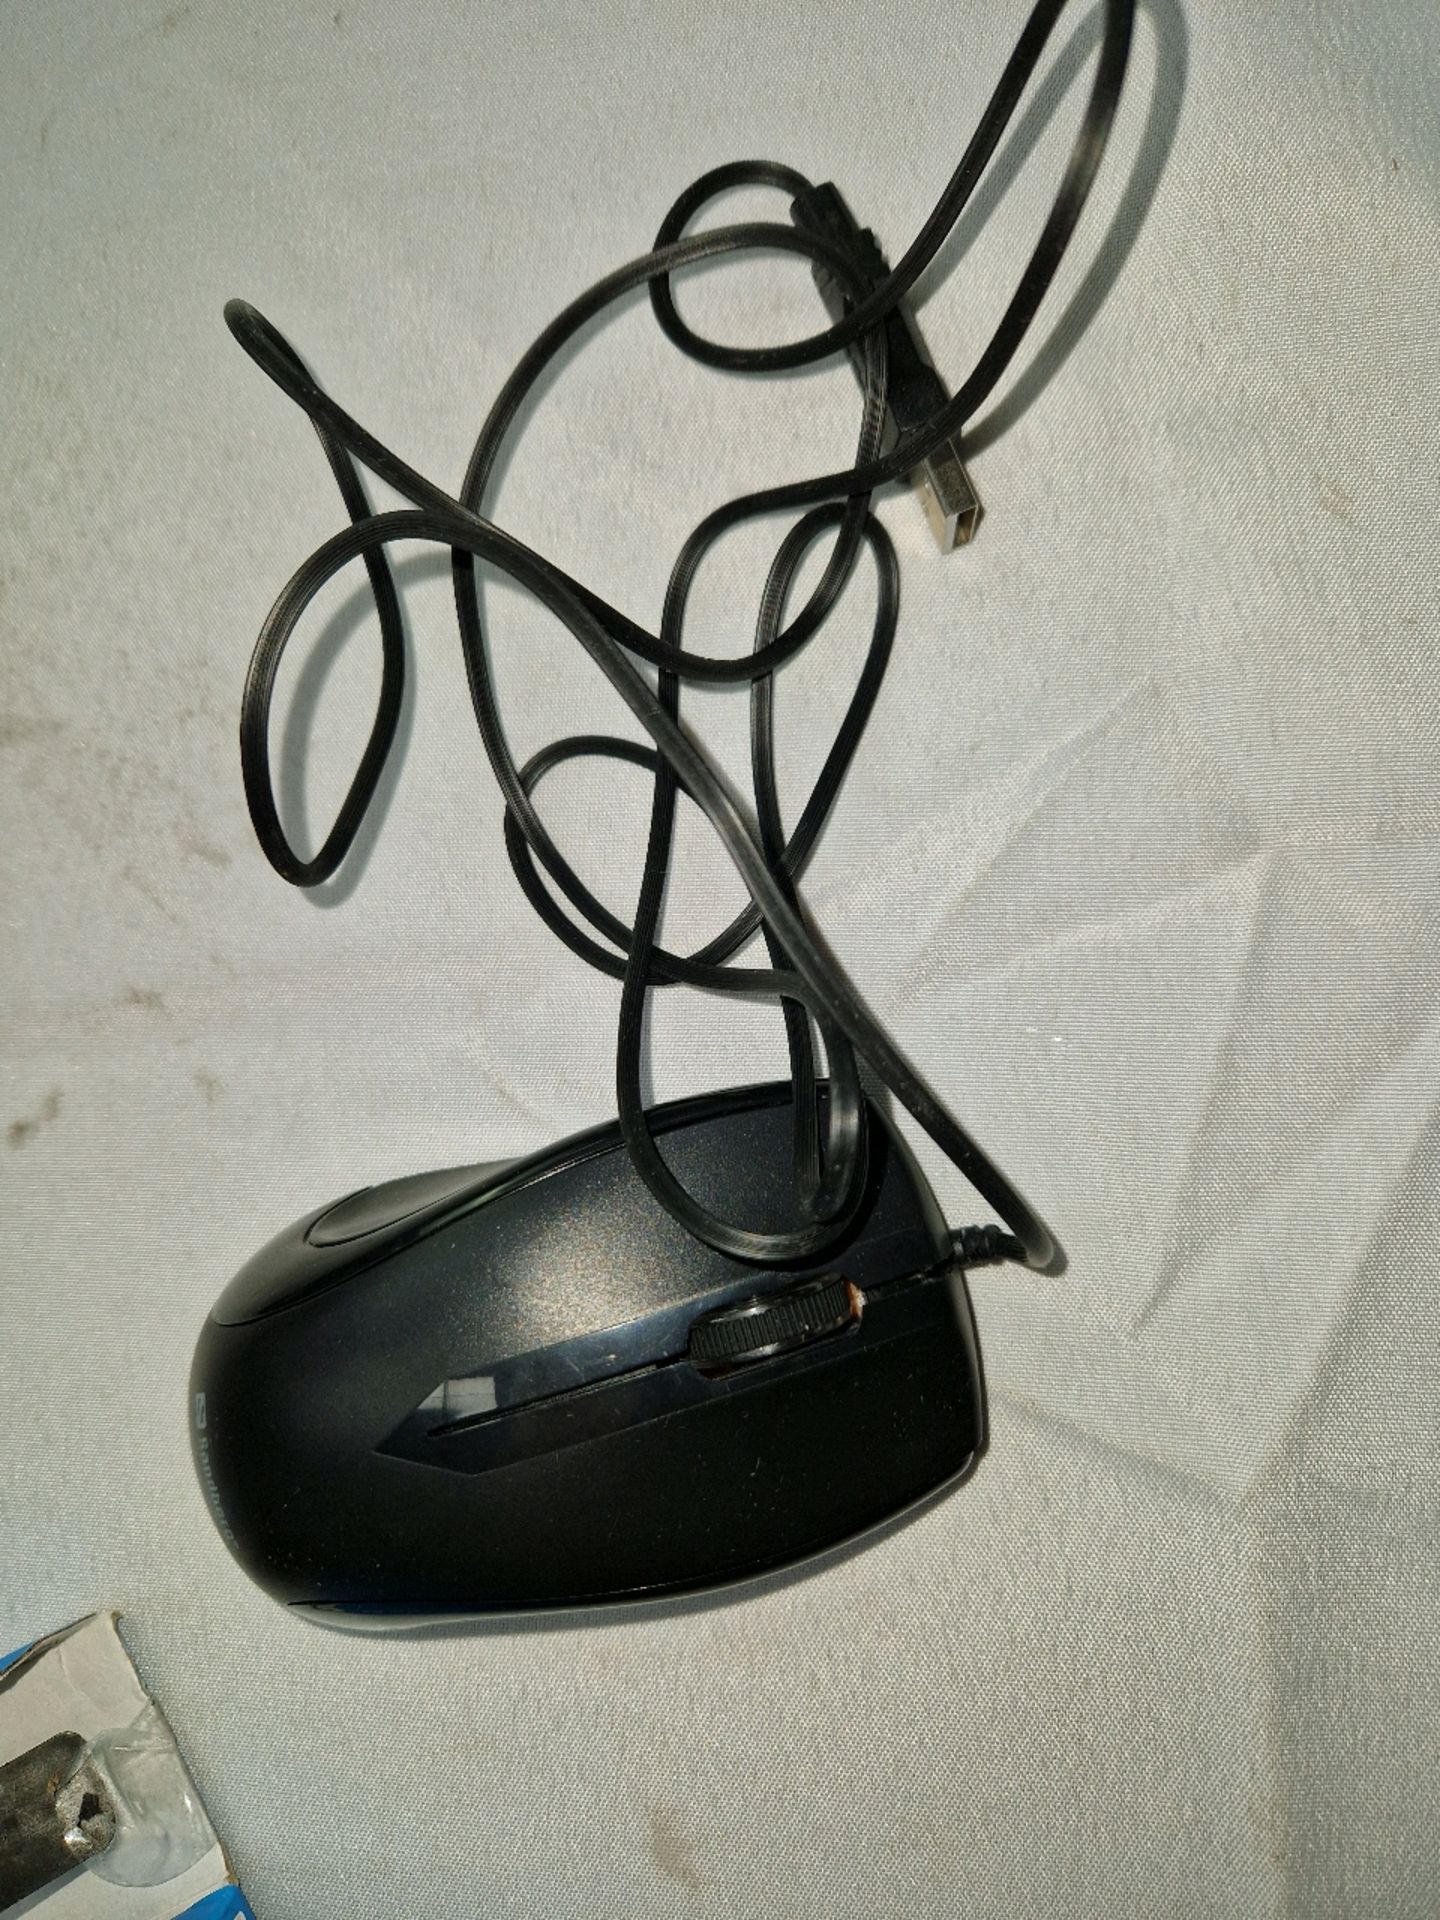 VIOBYTE COMPACT USB WIRED OPTICAL MOUSE - Image 2 of 2